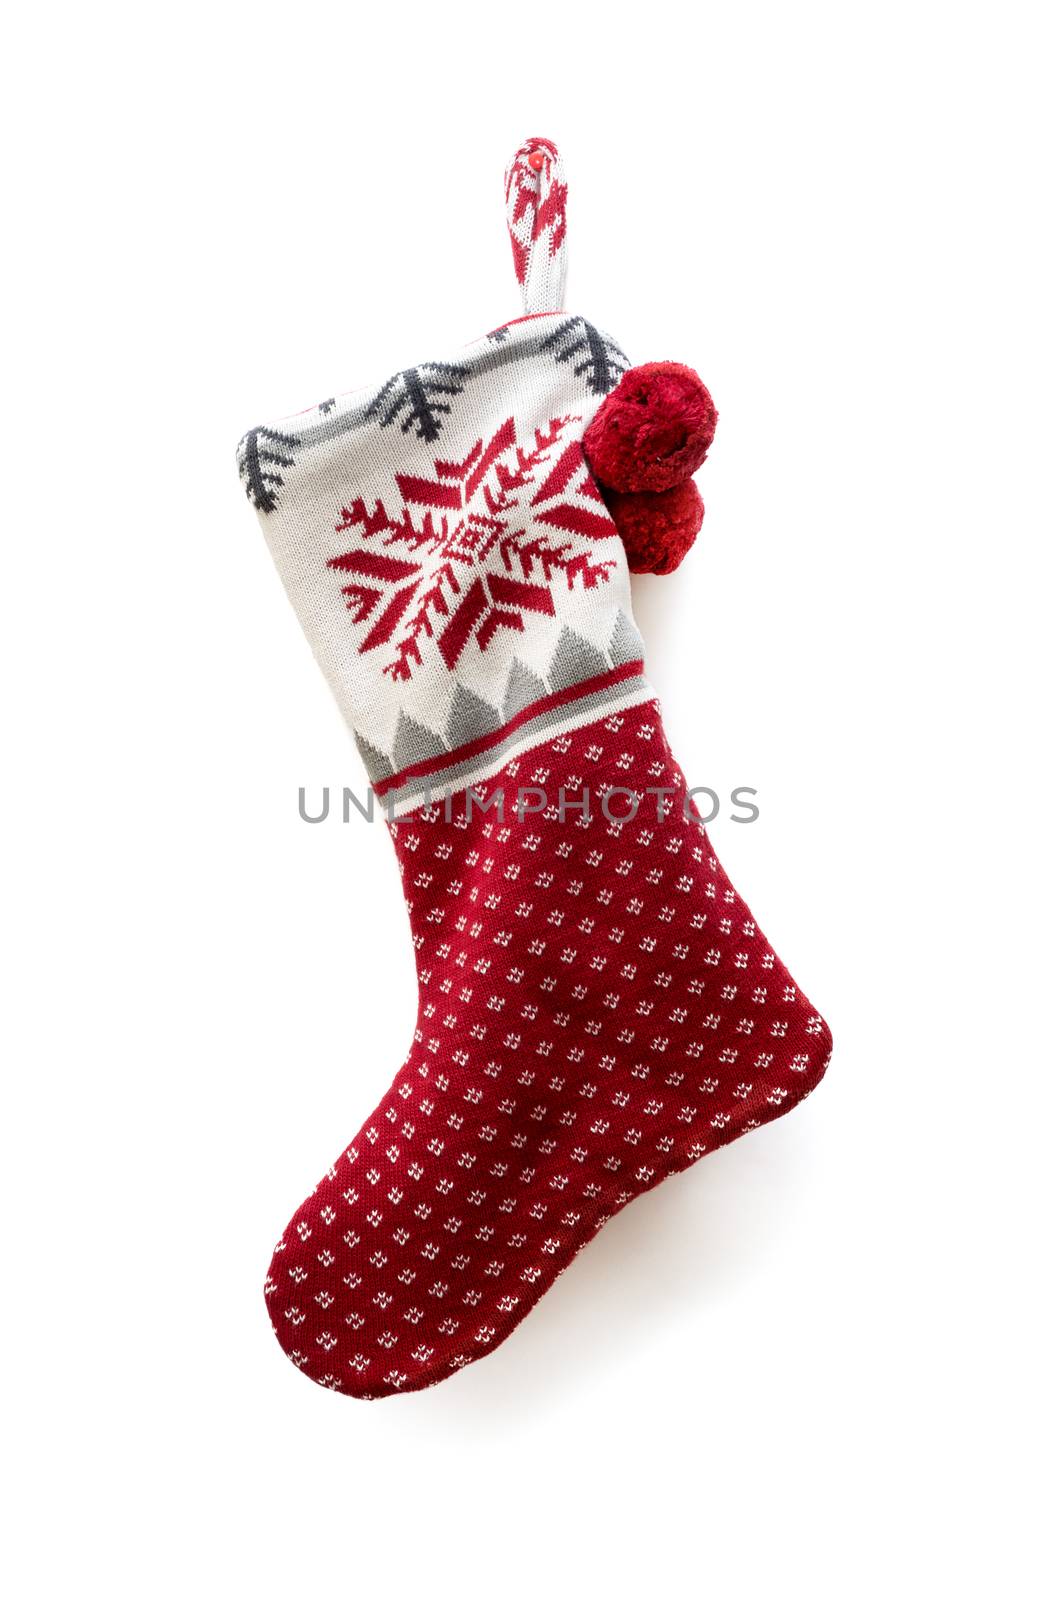 Christmas knitted sock on white background